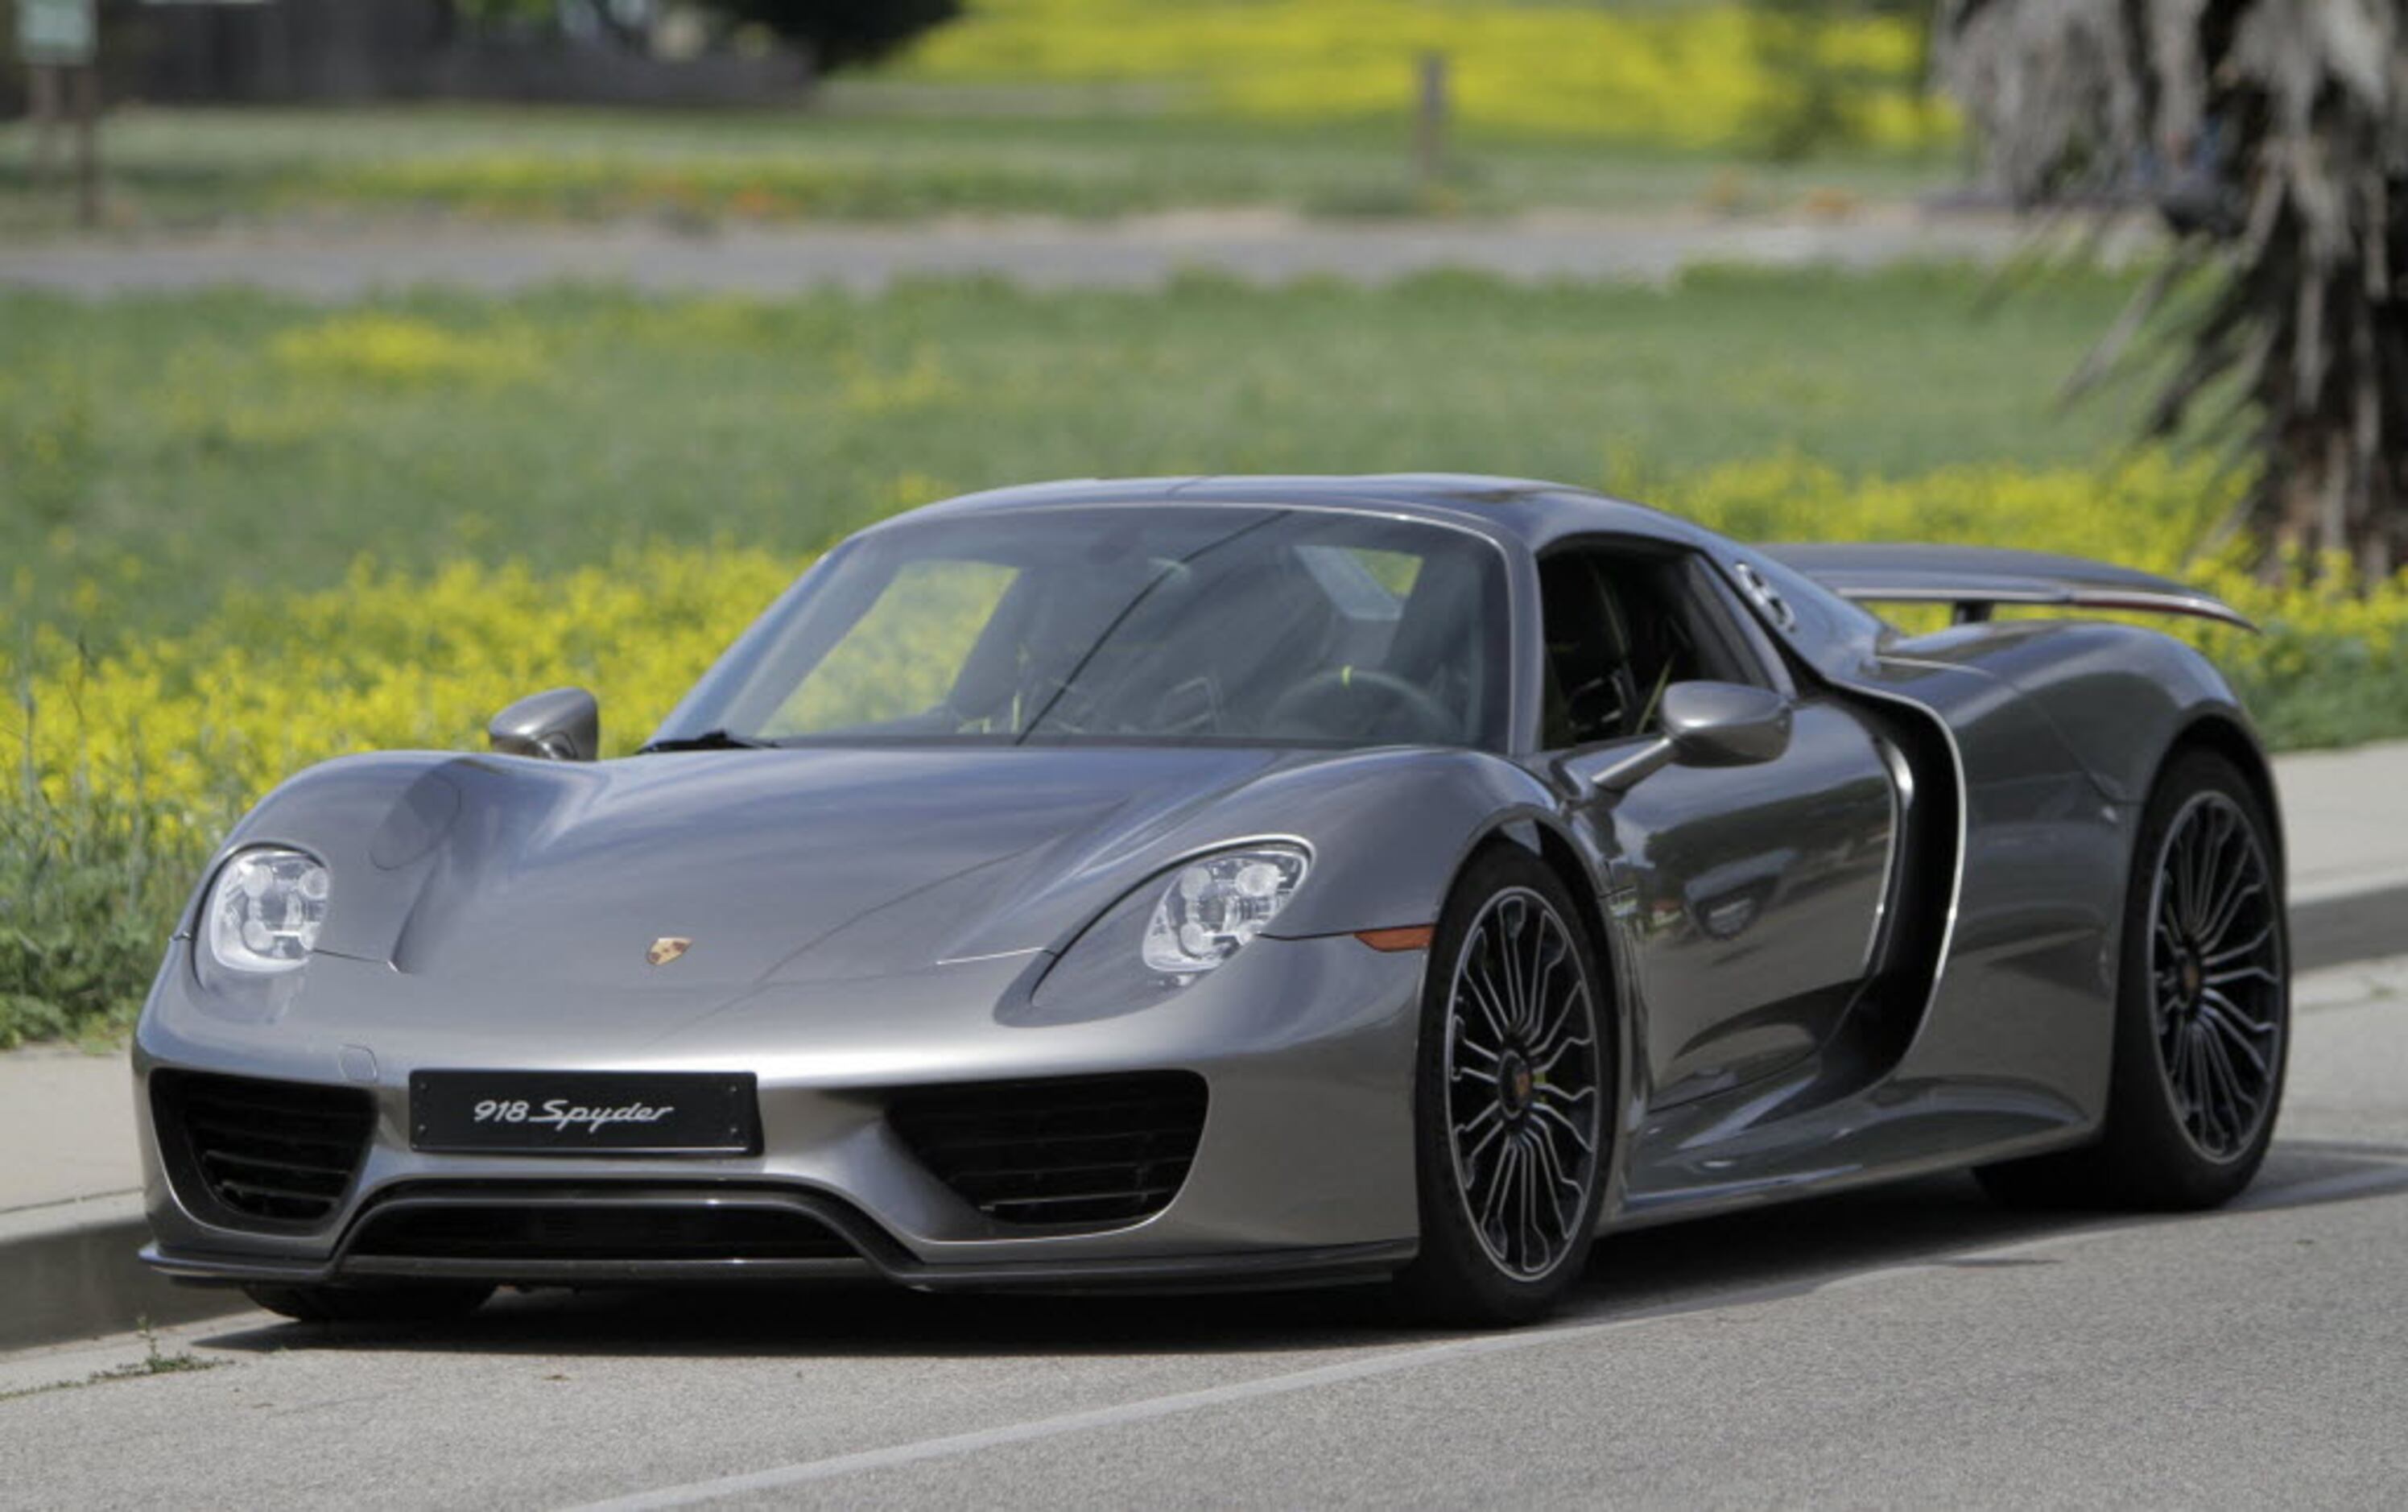 This Porsche 918 Spyder Is a 887 HP Hybrid Beast With Just 4,700 Miles